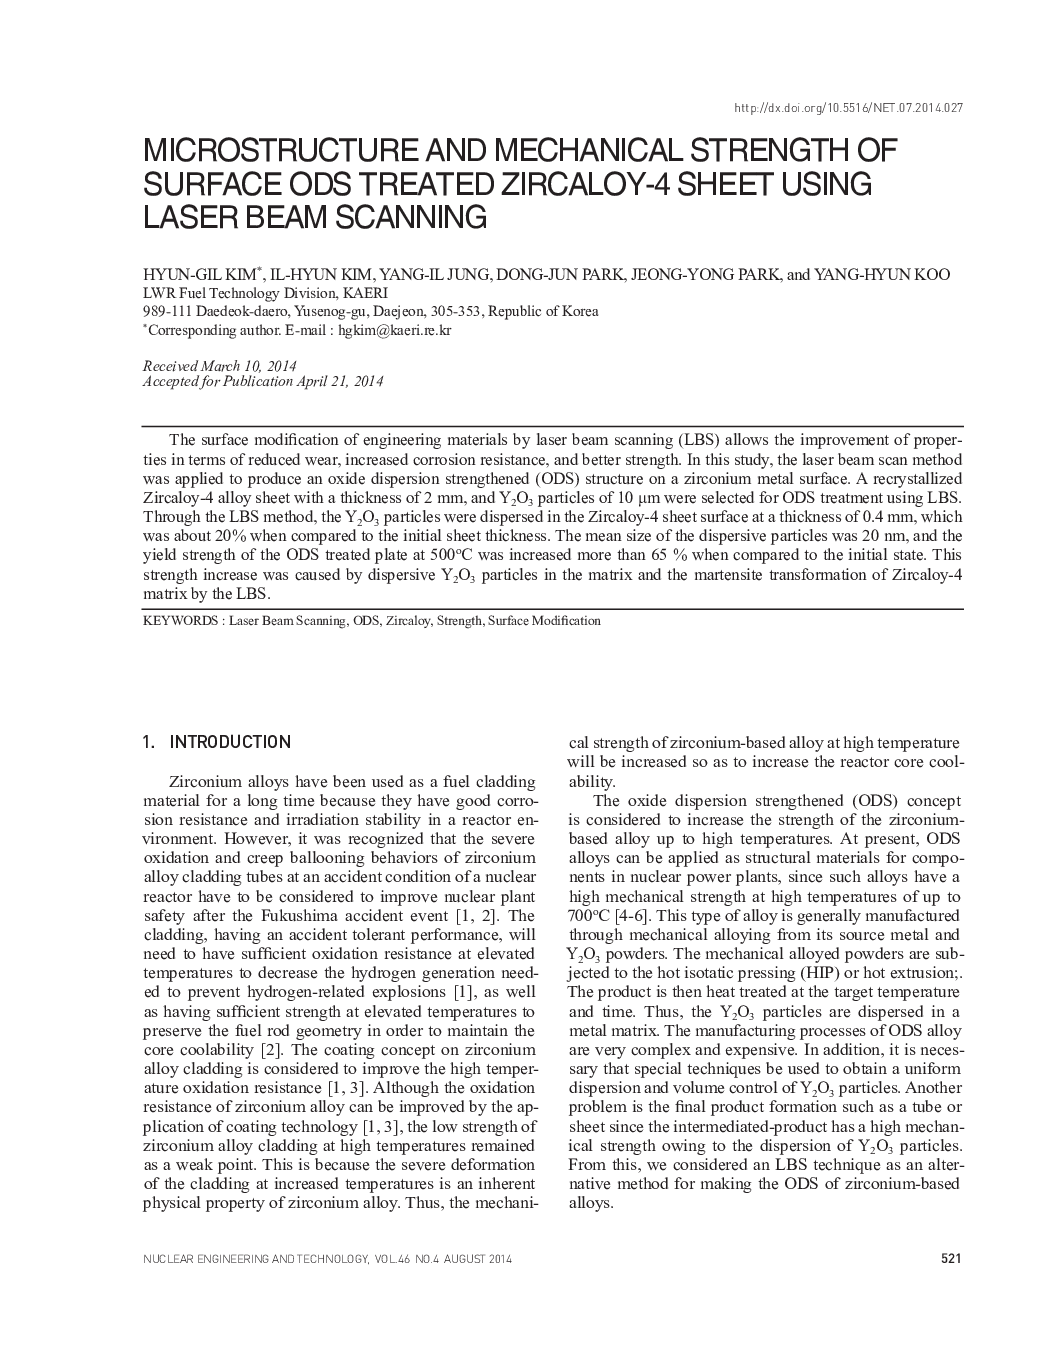 MICROSTRUCTURE AND MECHANICAL STRENGTH OF SURFACE ODS TREATED ZIRCALOY-4 SHEET USING LASER BEAM SCANNING